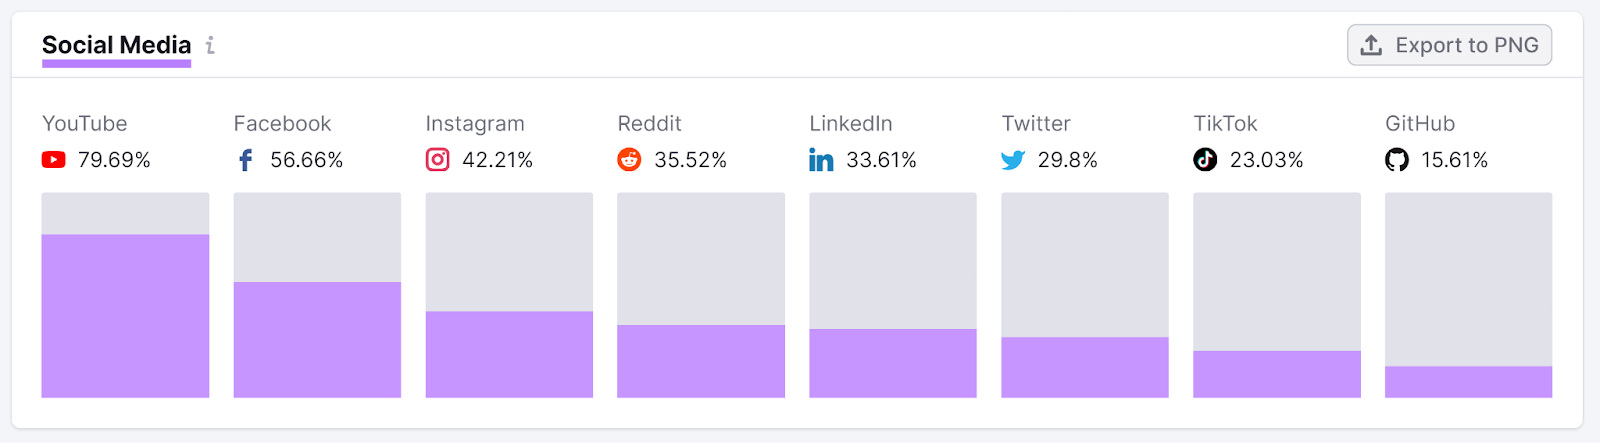 Social Media widget showing audience distribution summary for different platforms.